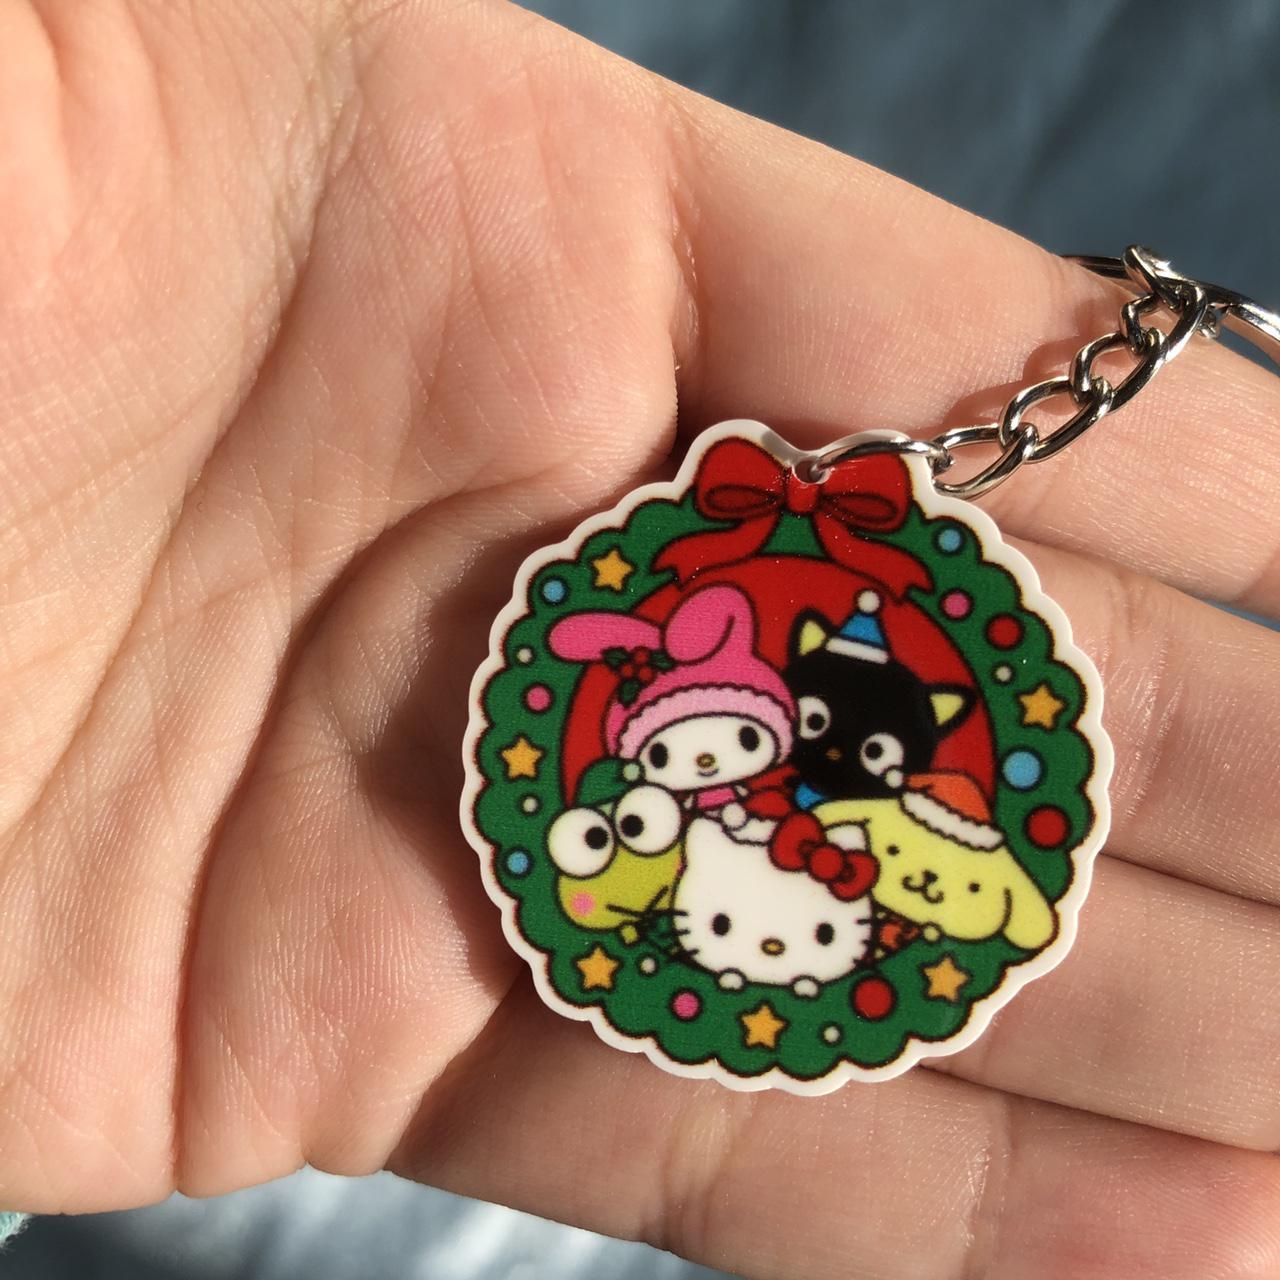 Product Image 2 - -Hello kitty keychain
-All Sales Are